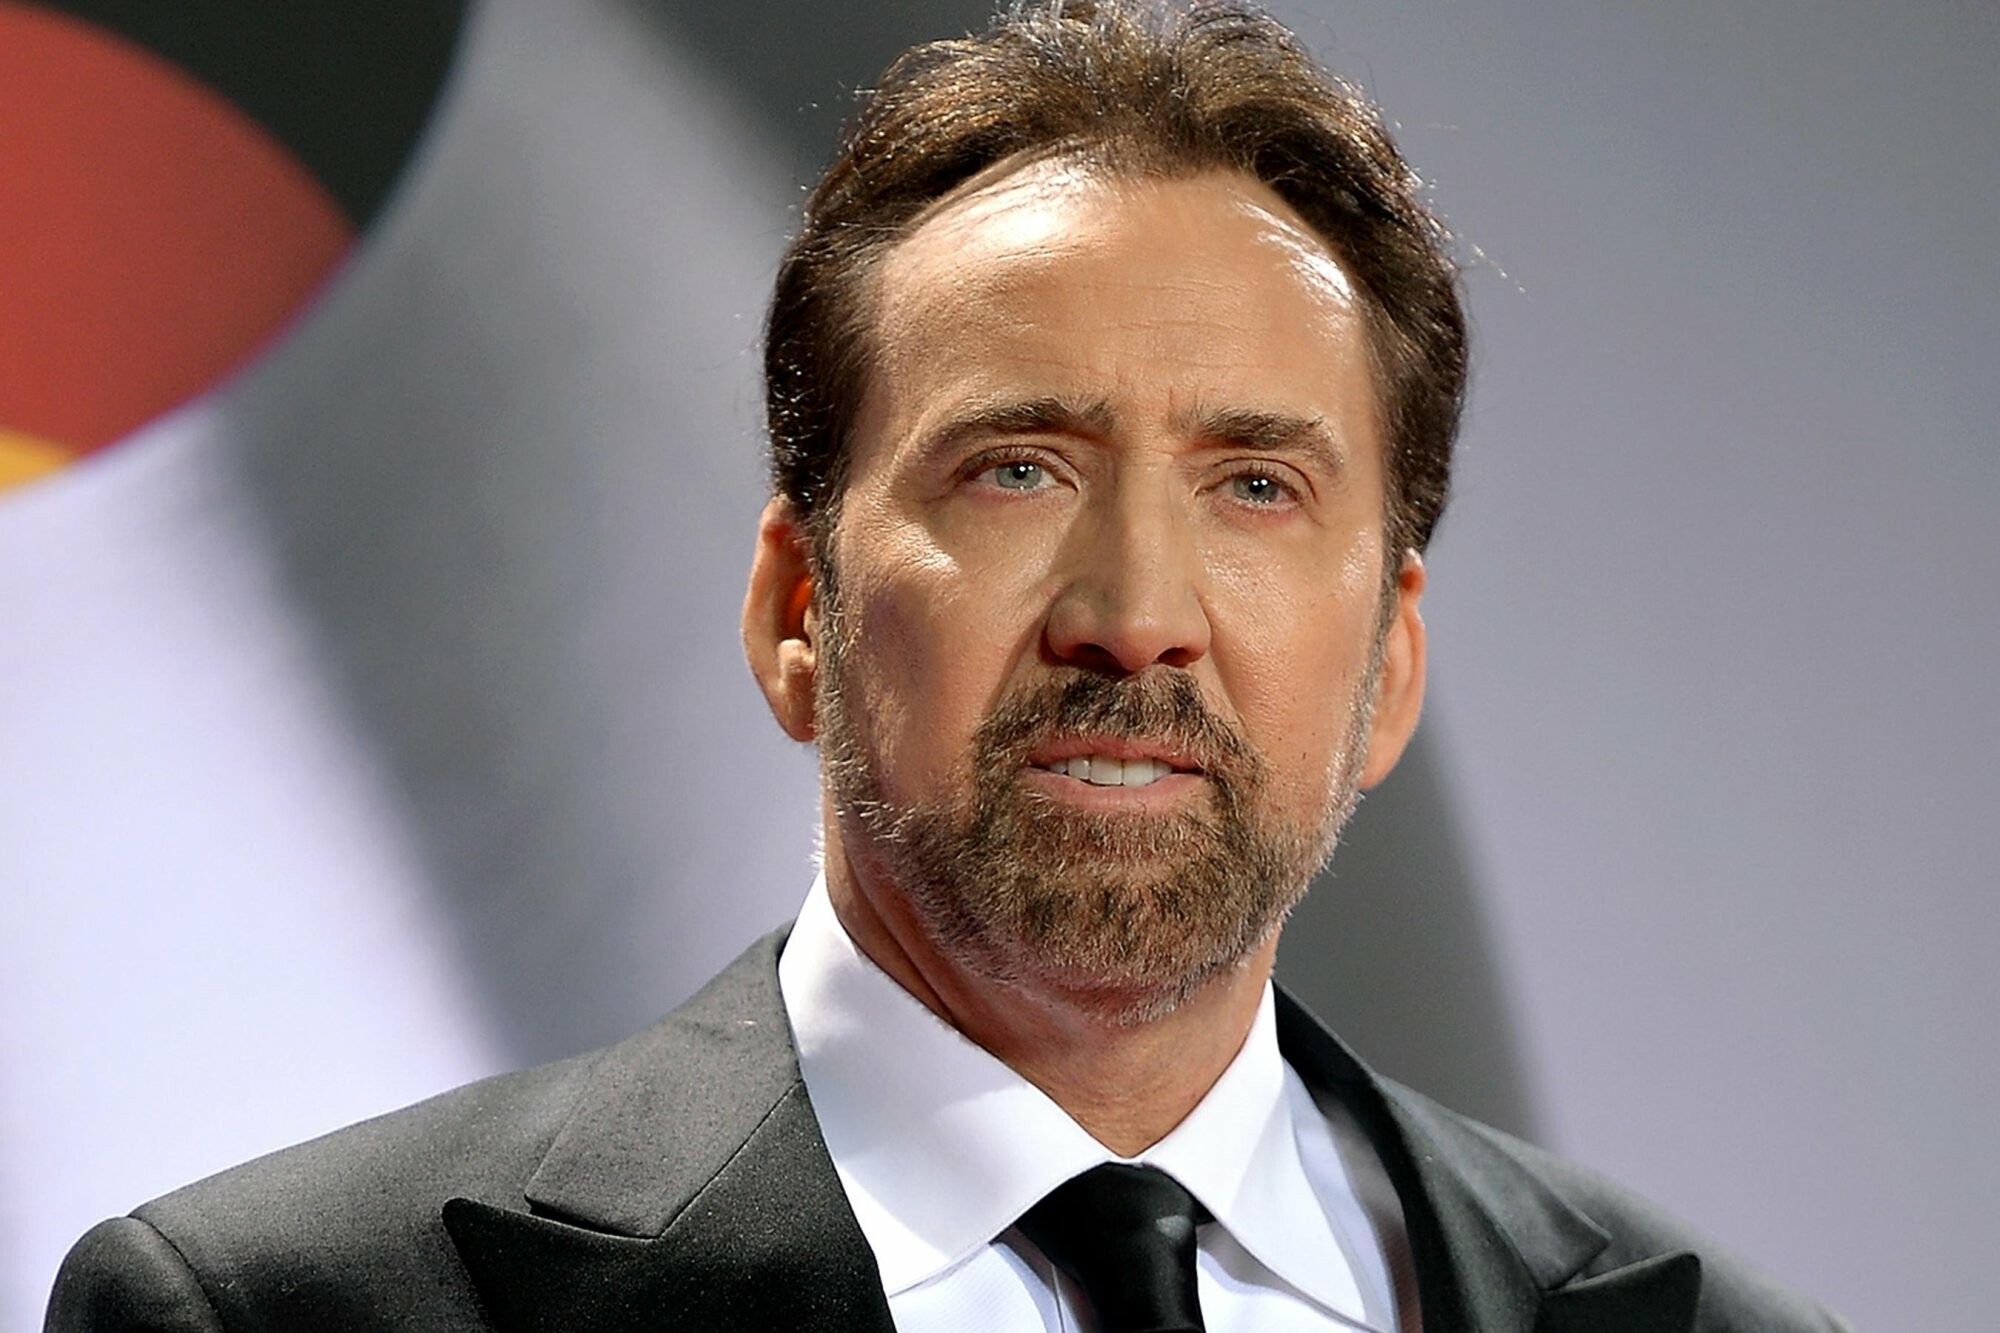 The Unbearable Weight of Massive Talent, Nicolas Cage playing himself, Unbearable weight, Film news, 2000x1340 HD Desktop